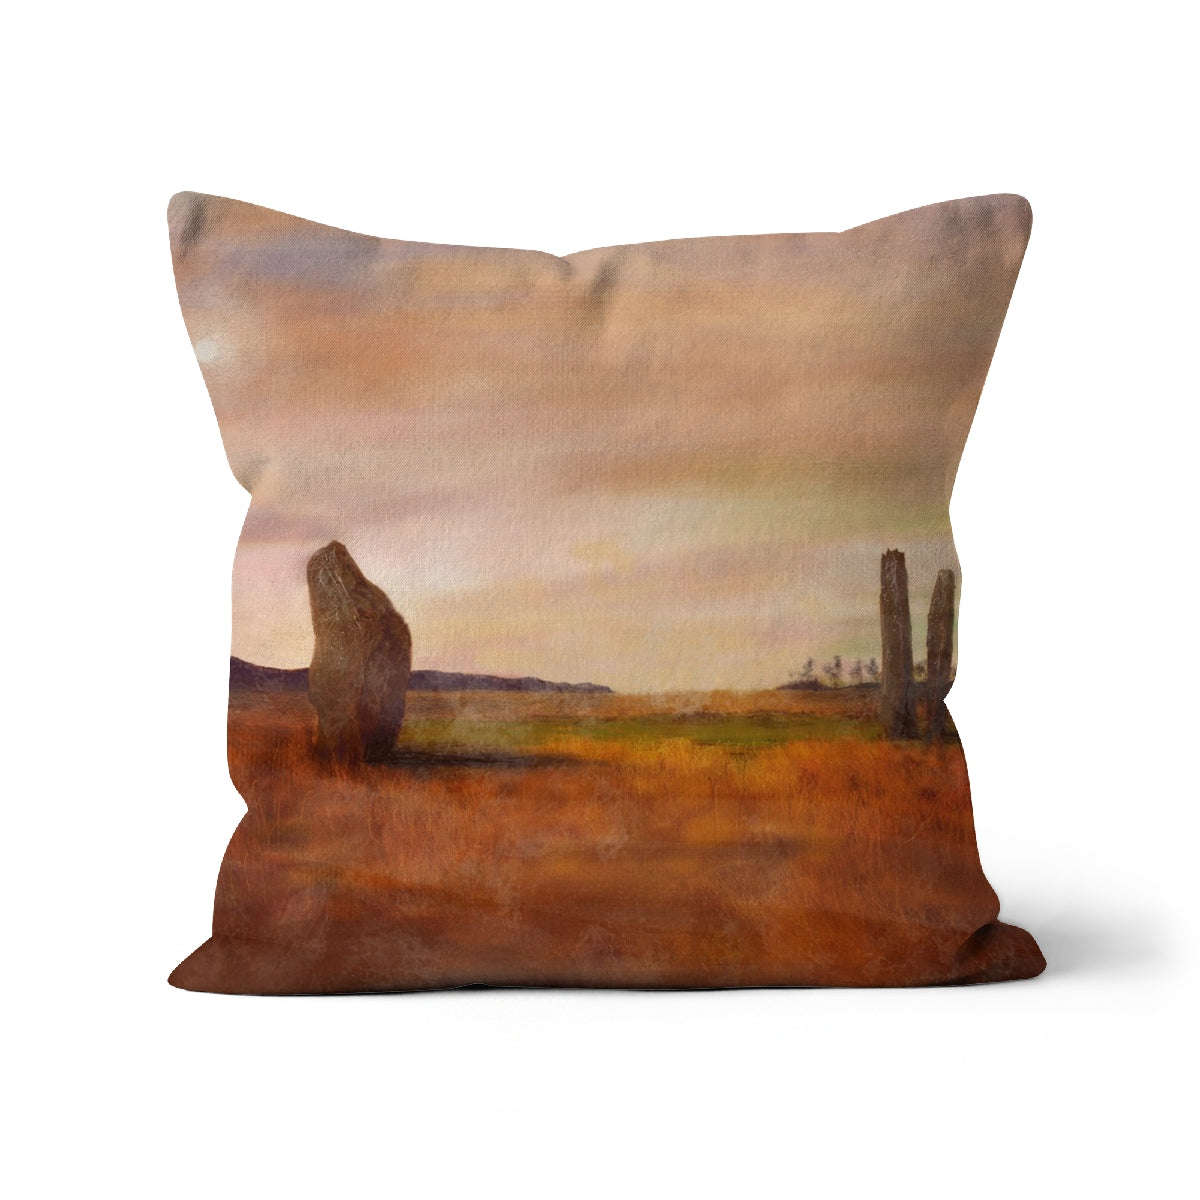 Machrie Moor Arran Art Gifts Cushion-Cushions-Arran Art Gallery-Canvas-12"x12"-Paintings, Prints, Homeware, Art Gifts From Scotland By Scottish Artist Kevin Hunter